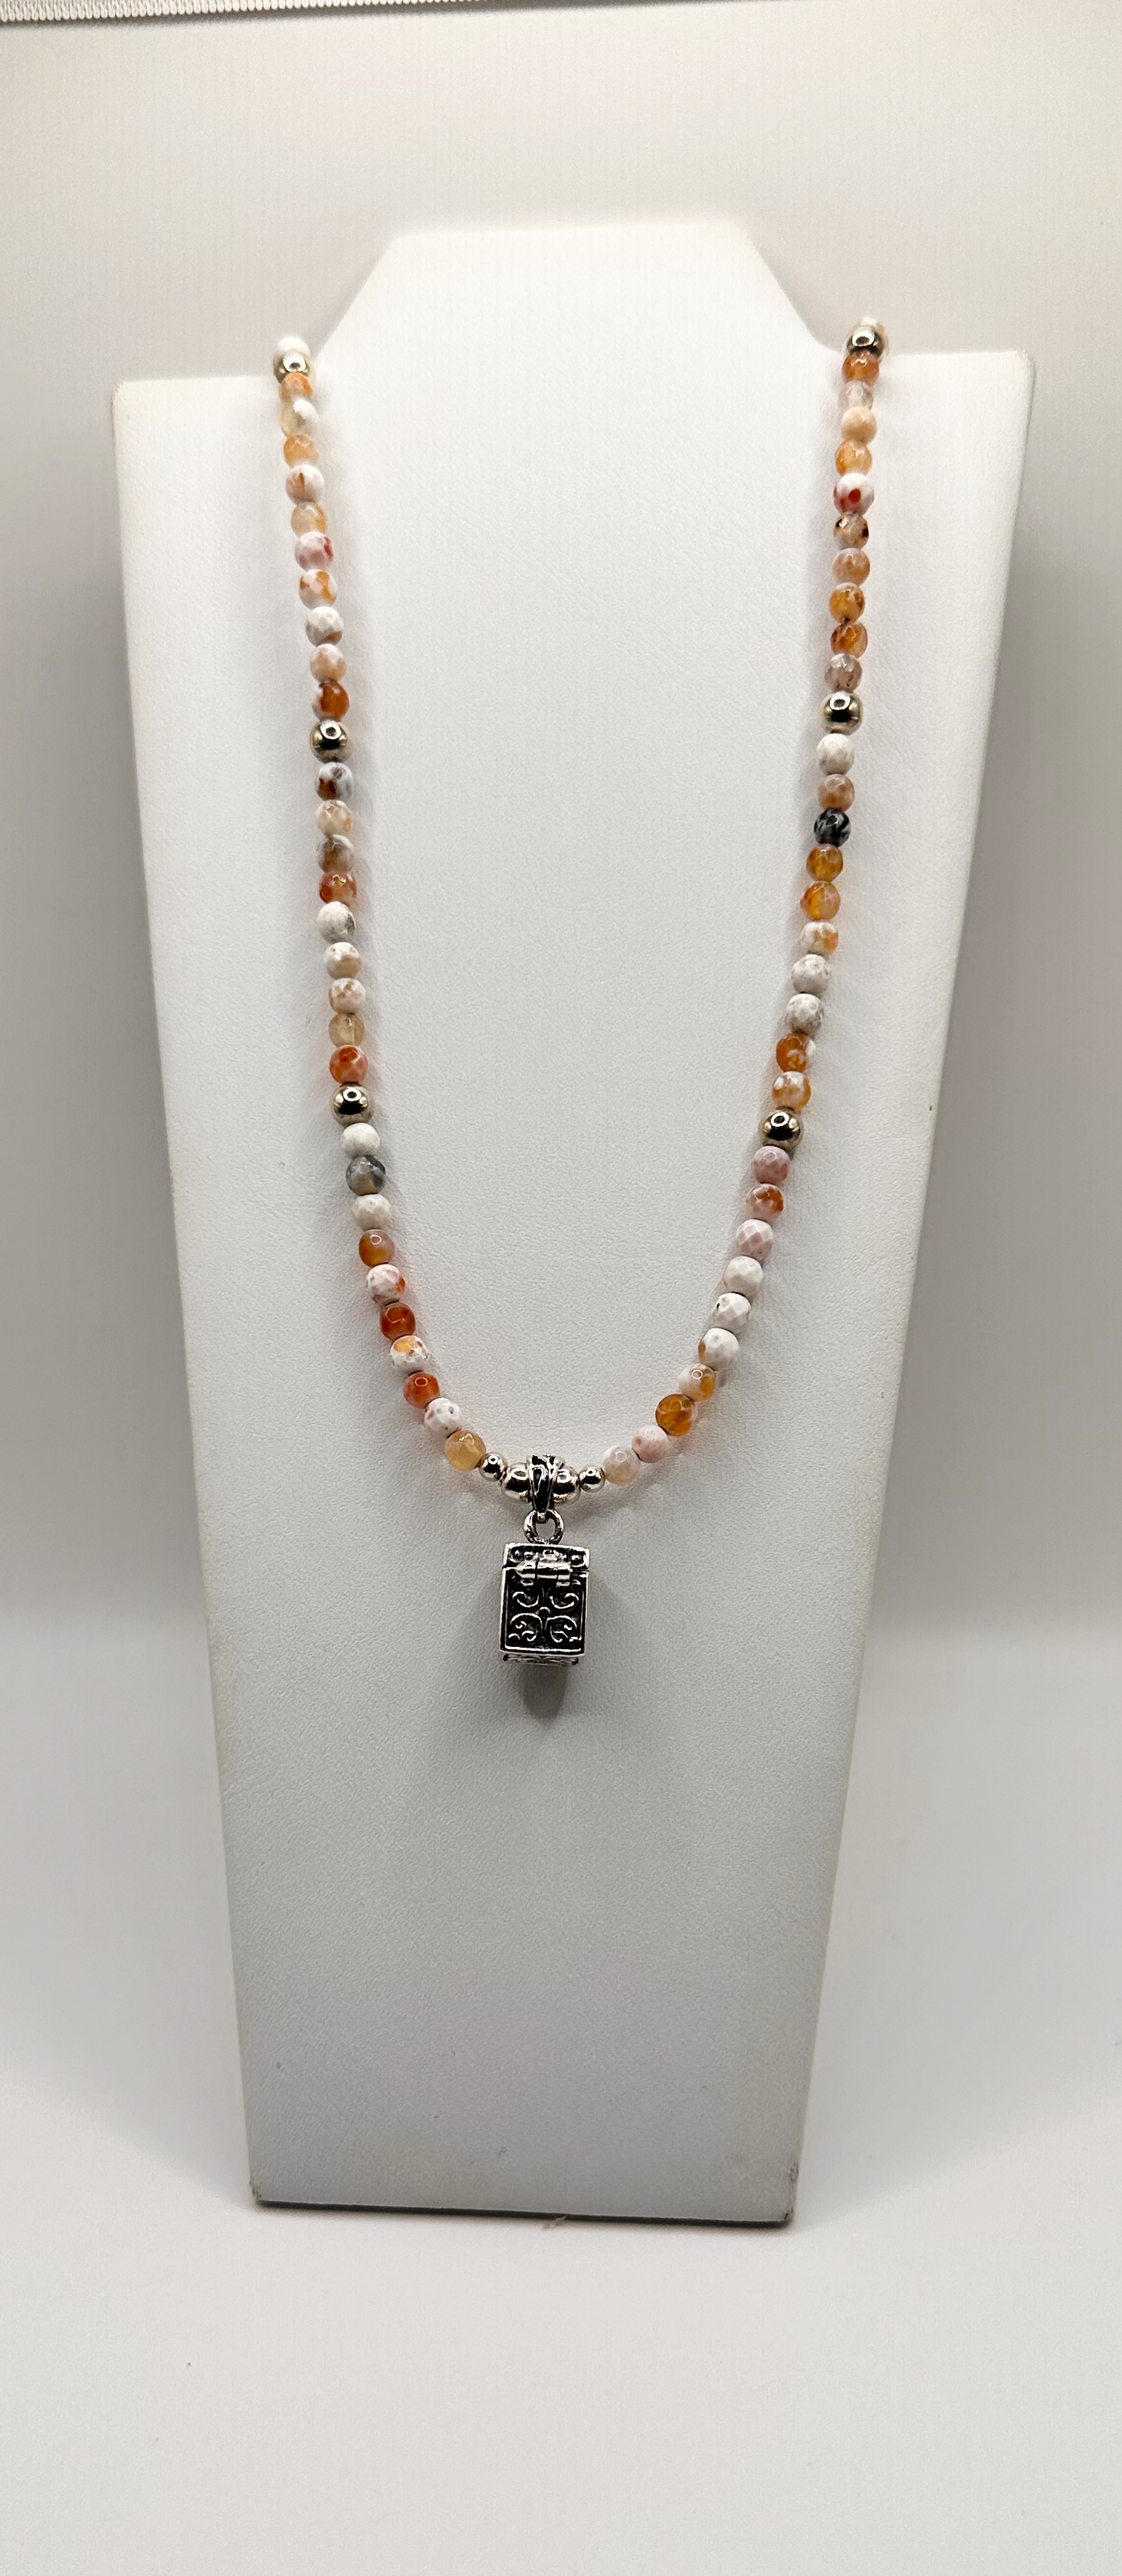 Orange Fire Agate Bead Necklace with a Sterling Silver Prayer Box Necklace